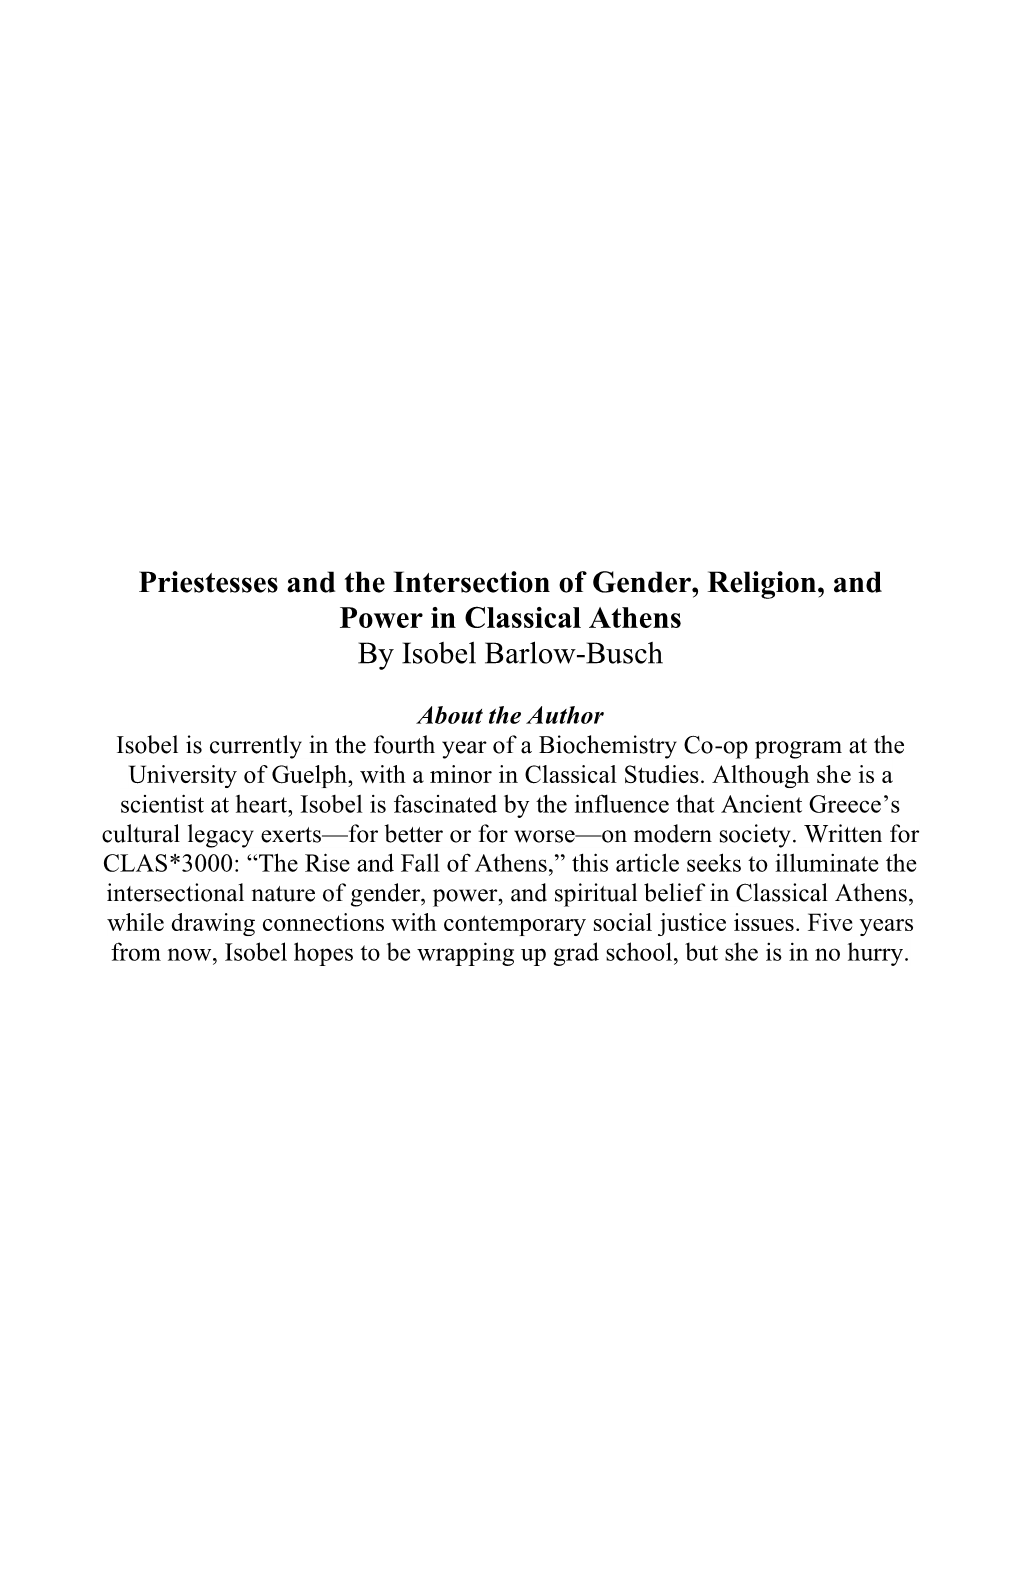 Priestesses and the Intersection of Gender, Religion, and Power in Classical Athens by Isobel Barlow-Busch